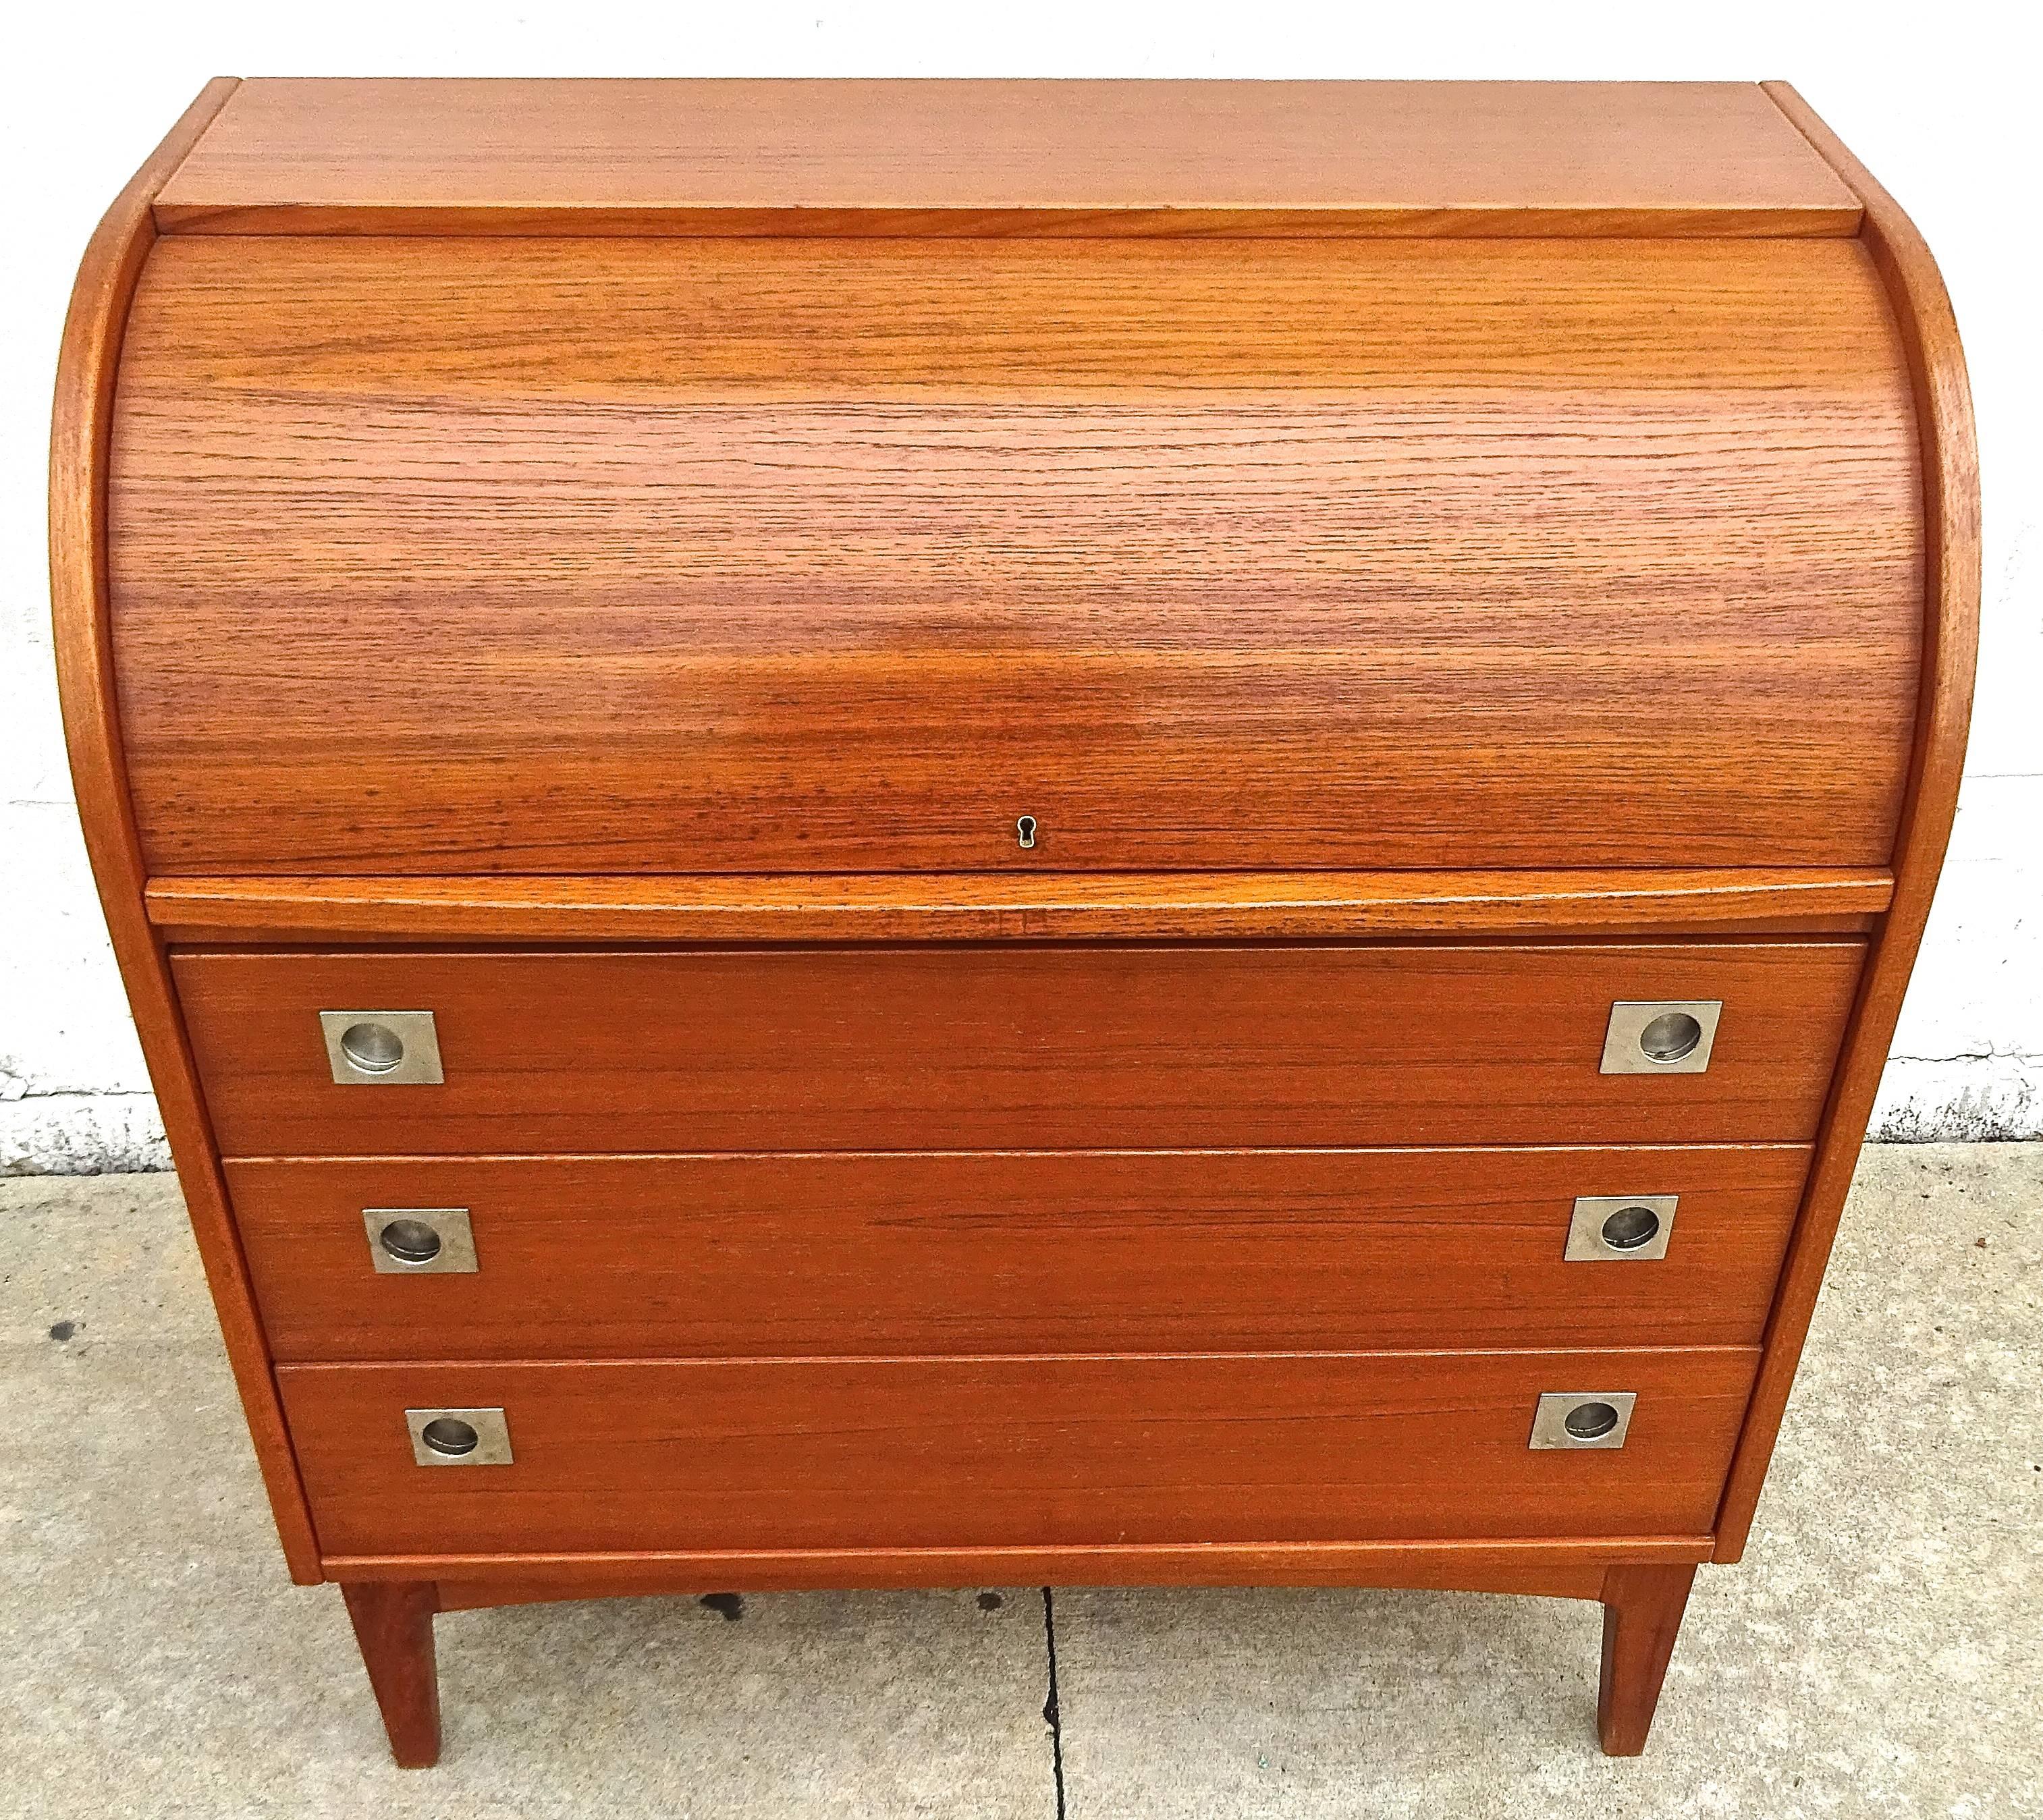 Chic Broderna Gustaffsons teak roll top secreatary with chest of drawers with, designed in the 1960s in Sweden. 

This model features rare never before seen polished aluminium recessed drawer handle hardware. 

A stylish and useful piece!